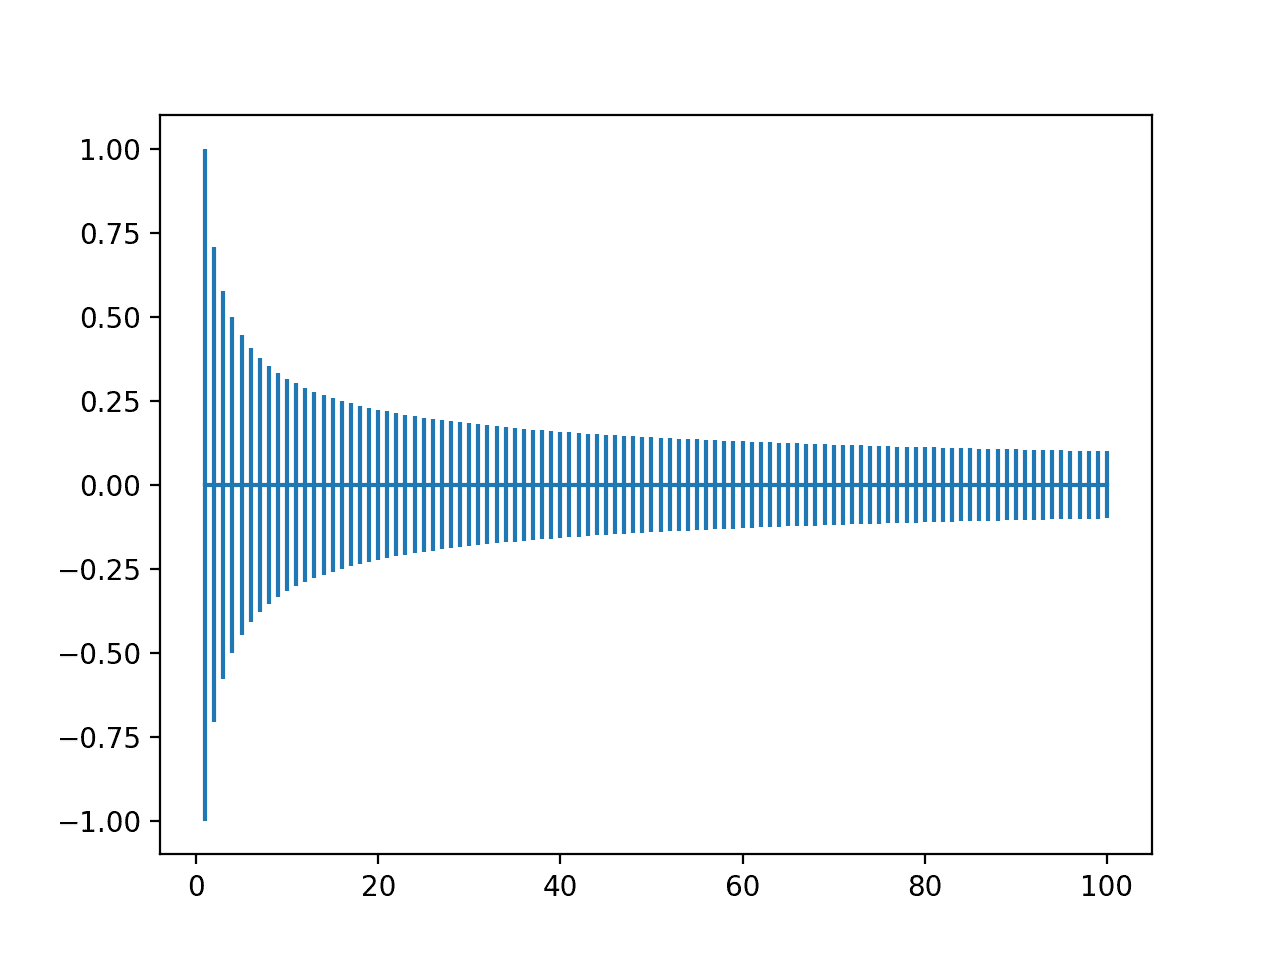 Plot of Range of Xavier Weight Initialization With Inputs From One to One Hundred